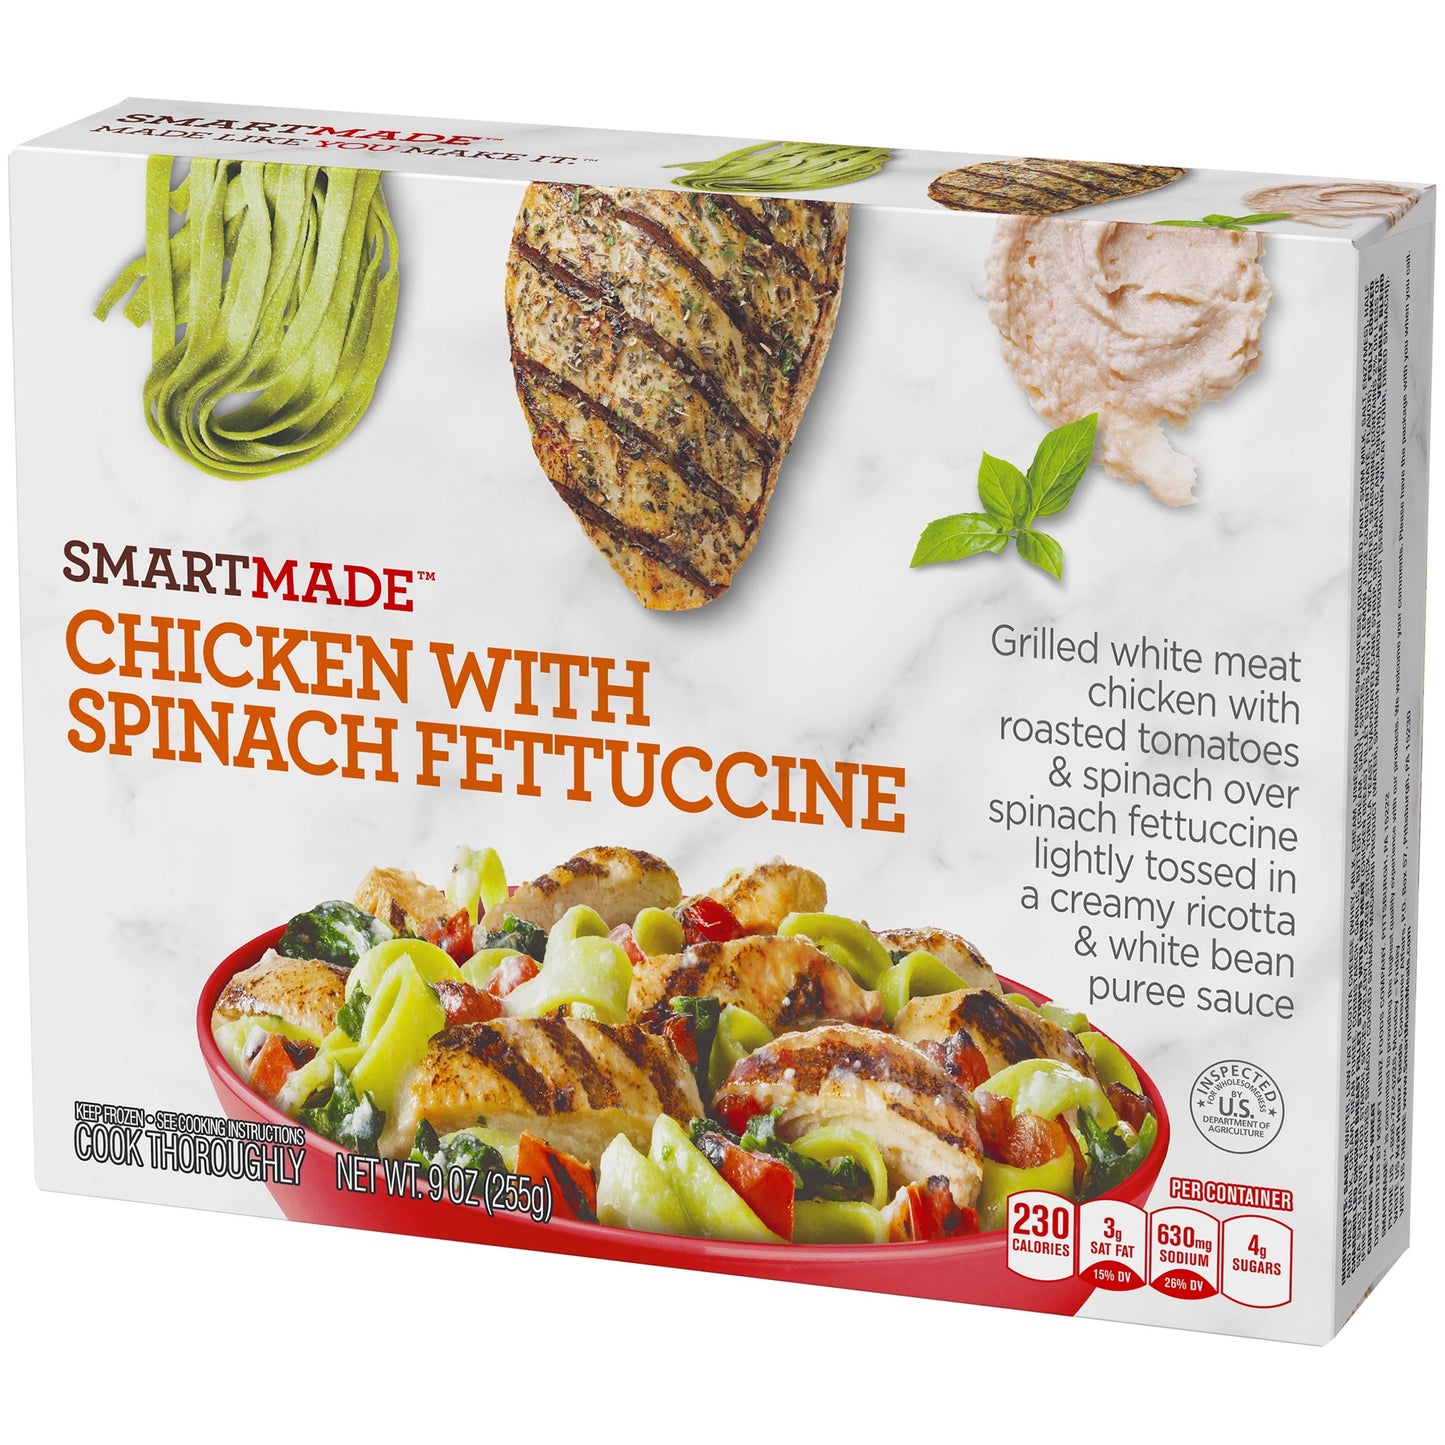 Smart Made Chicken with Spinach Fettuccine Pasta, Tomatoes, Spinach & Creamy Ricotta White Bean Puree Sauce Frozen Meal, 9 oz Box